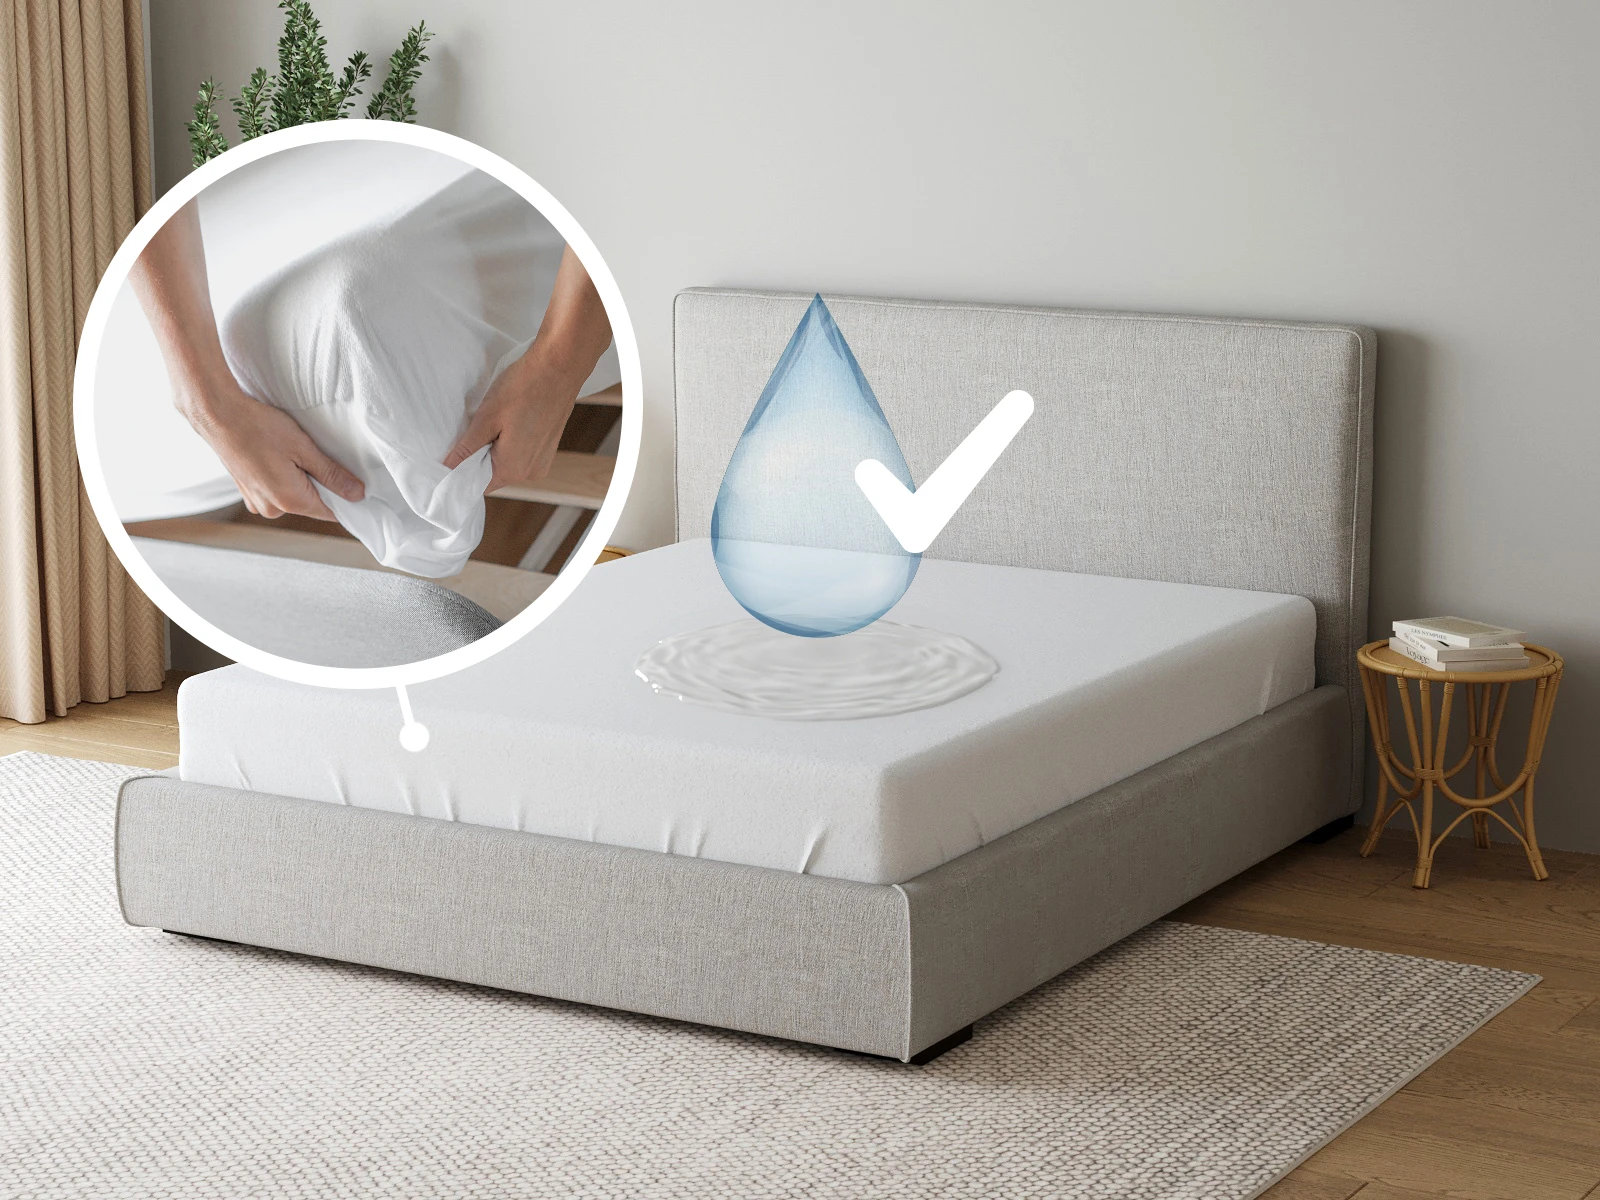 1 Waterproof mattress protector all-round protective cover 100x200 cm